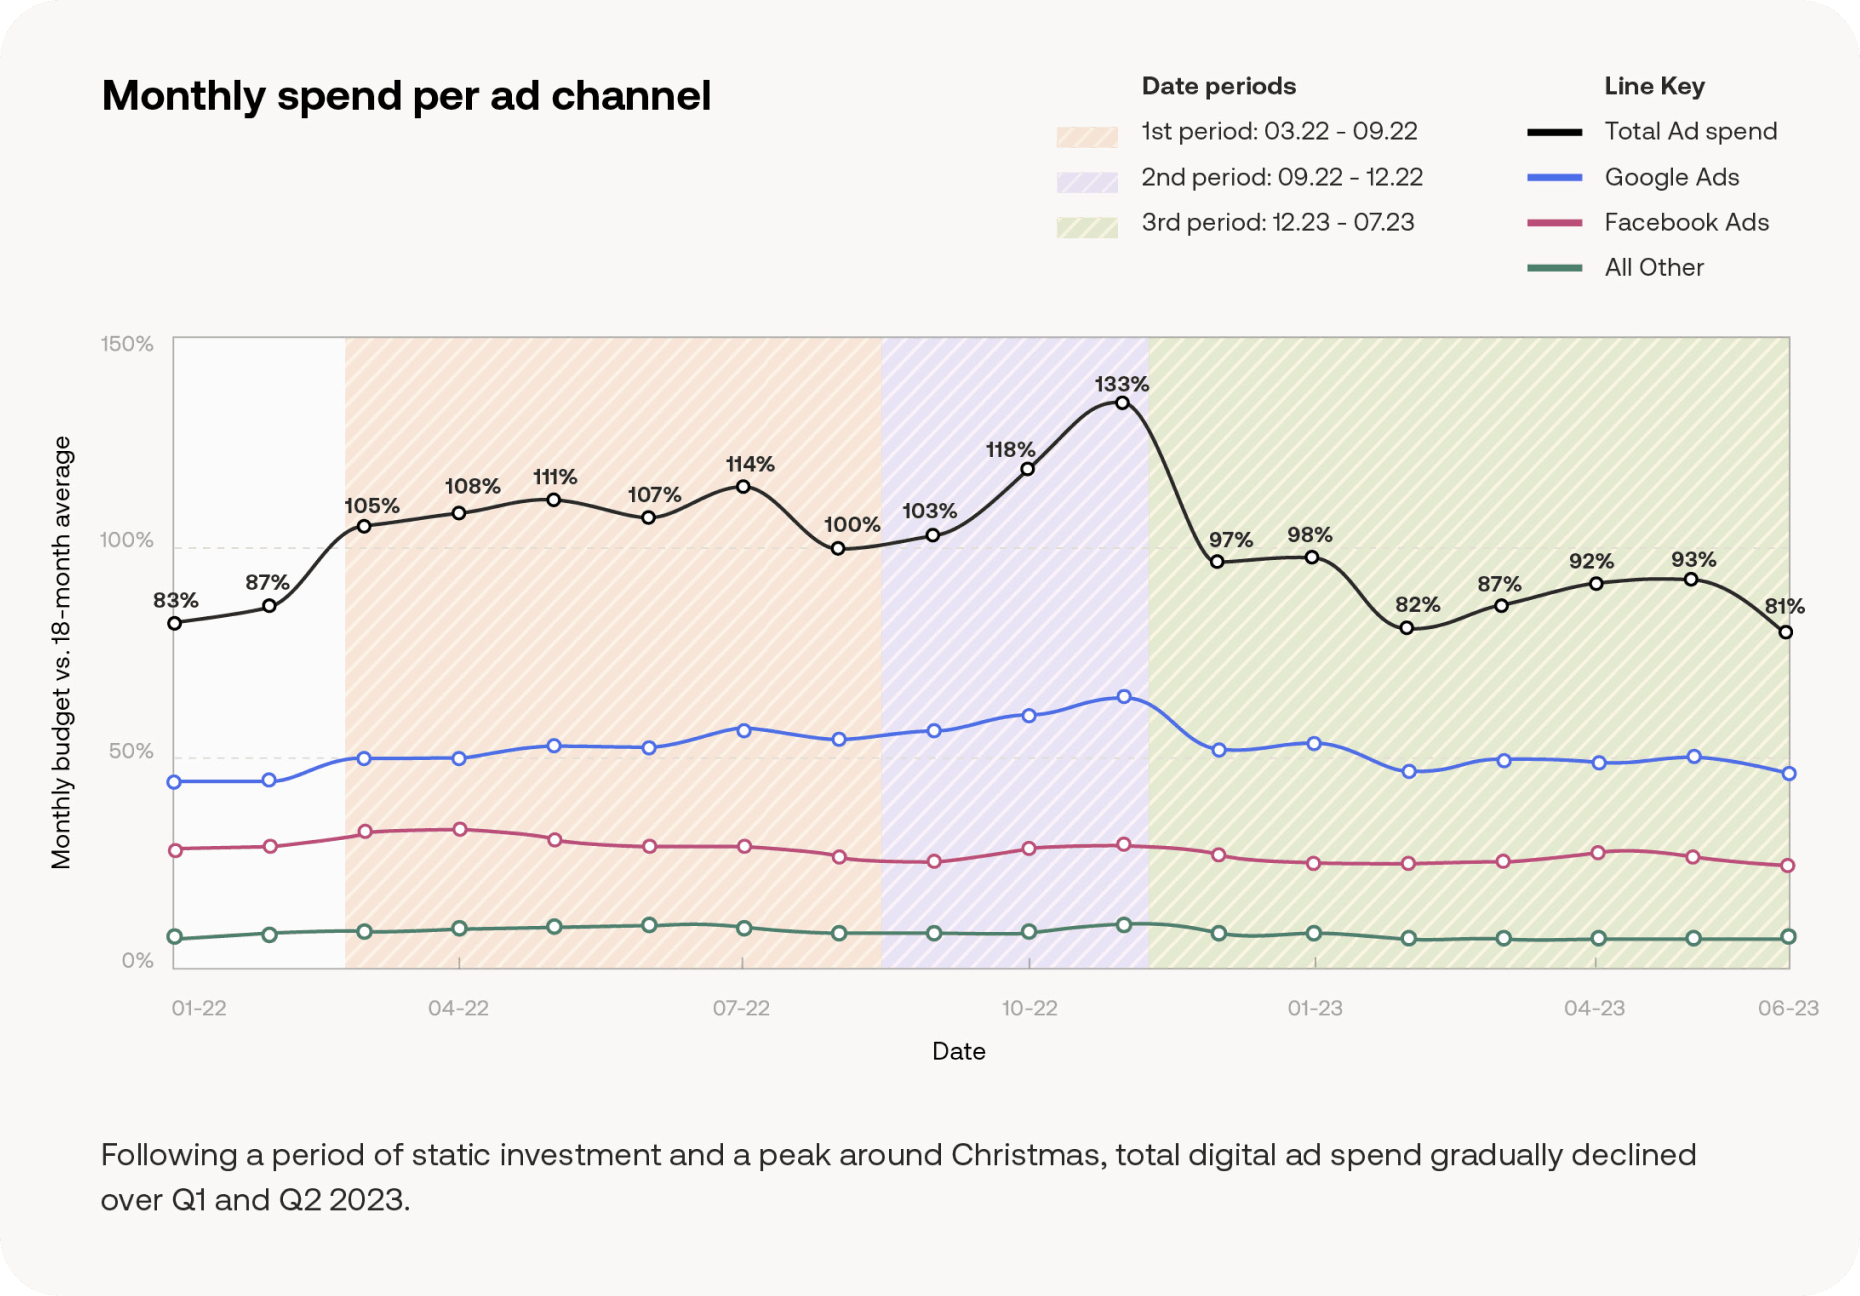 Graph showing monthly spend per ad channel